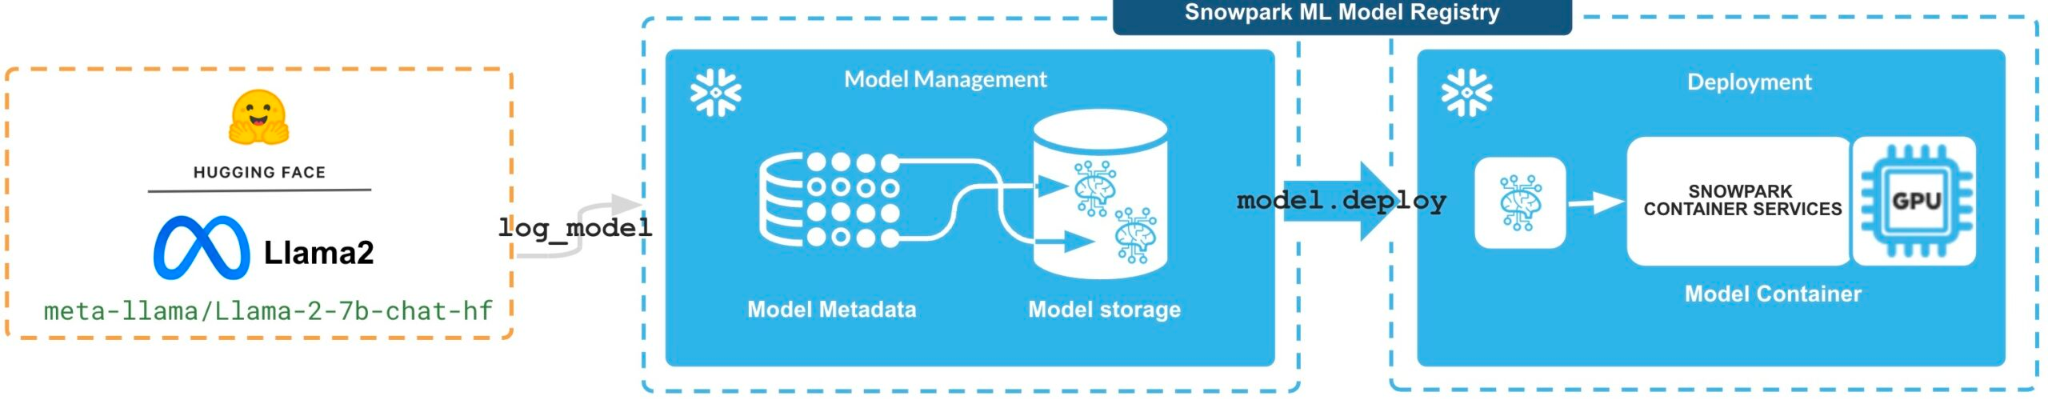 A diagram of how the Snowpark model registry and container service works. 